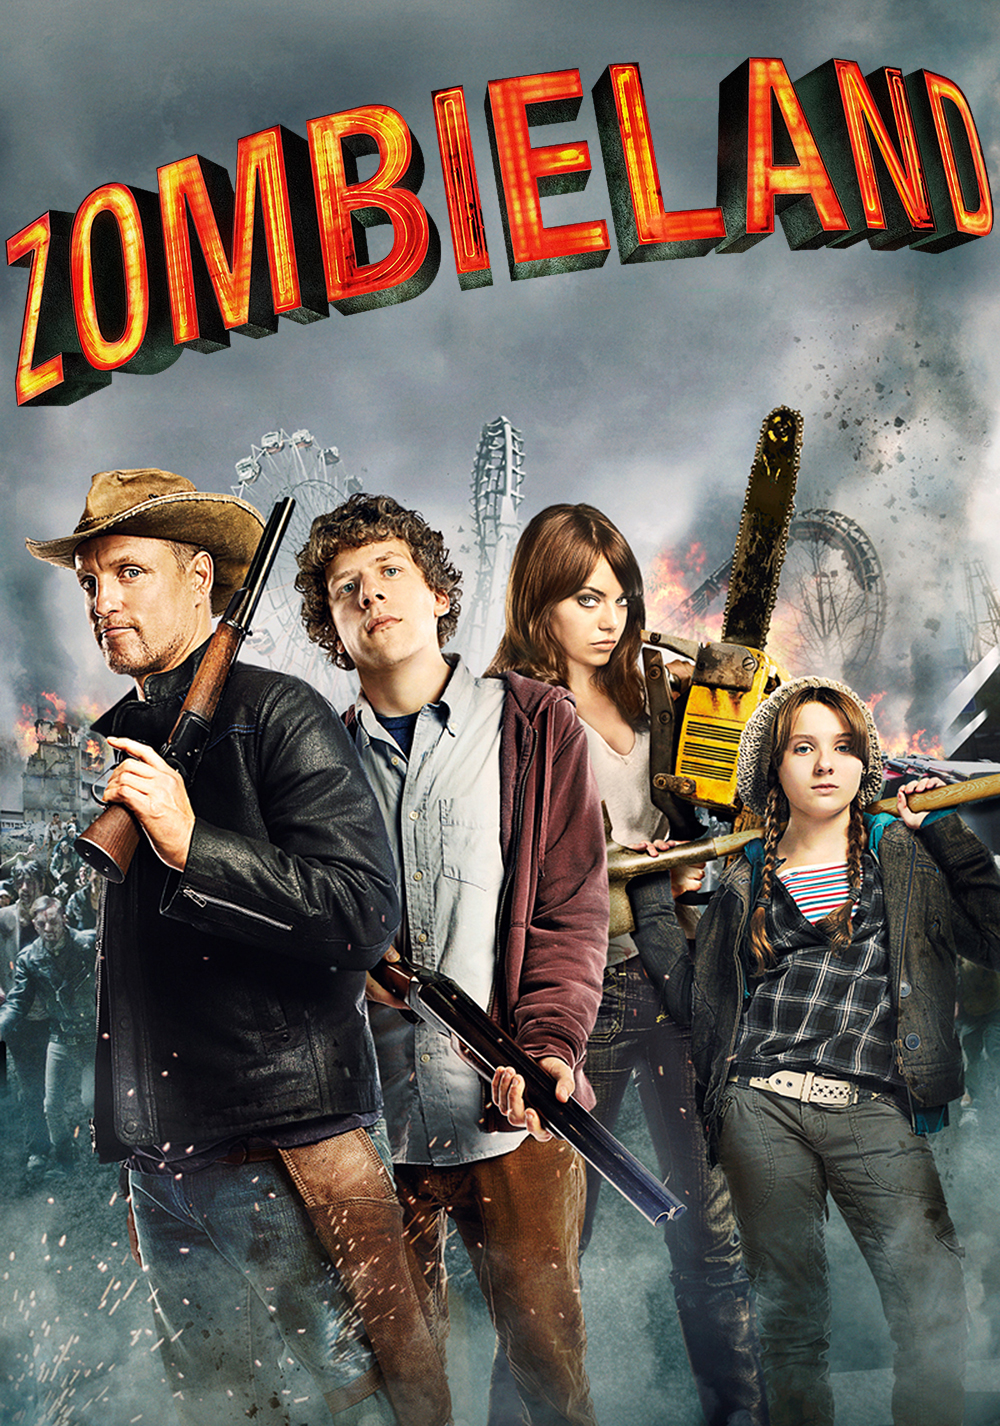 Poster Zombieland